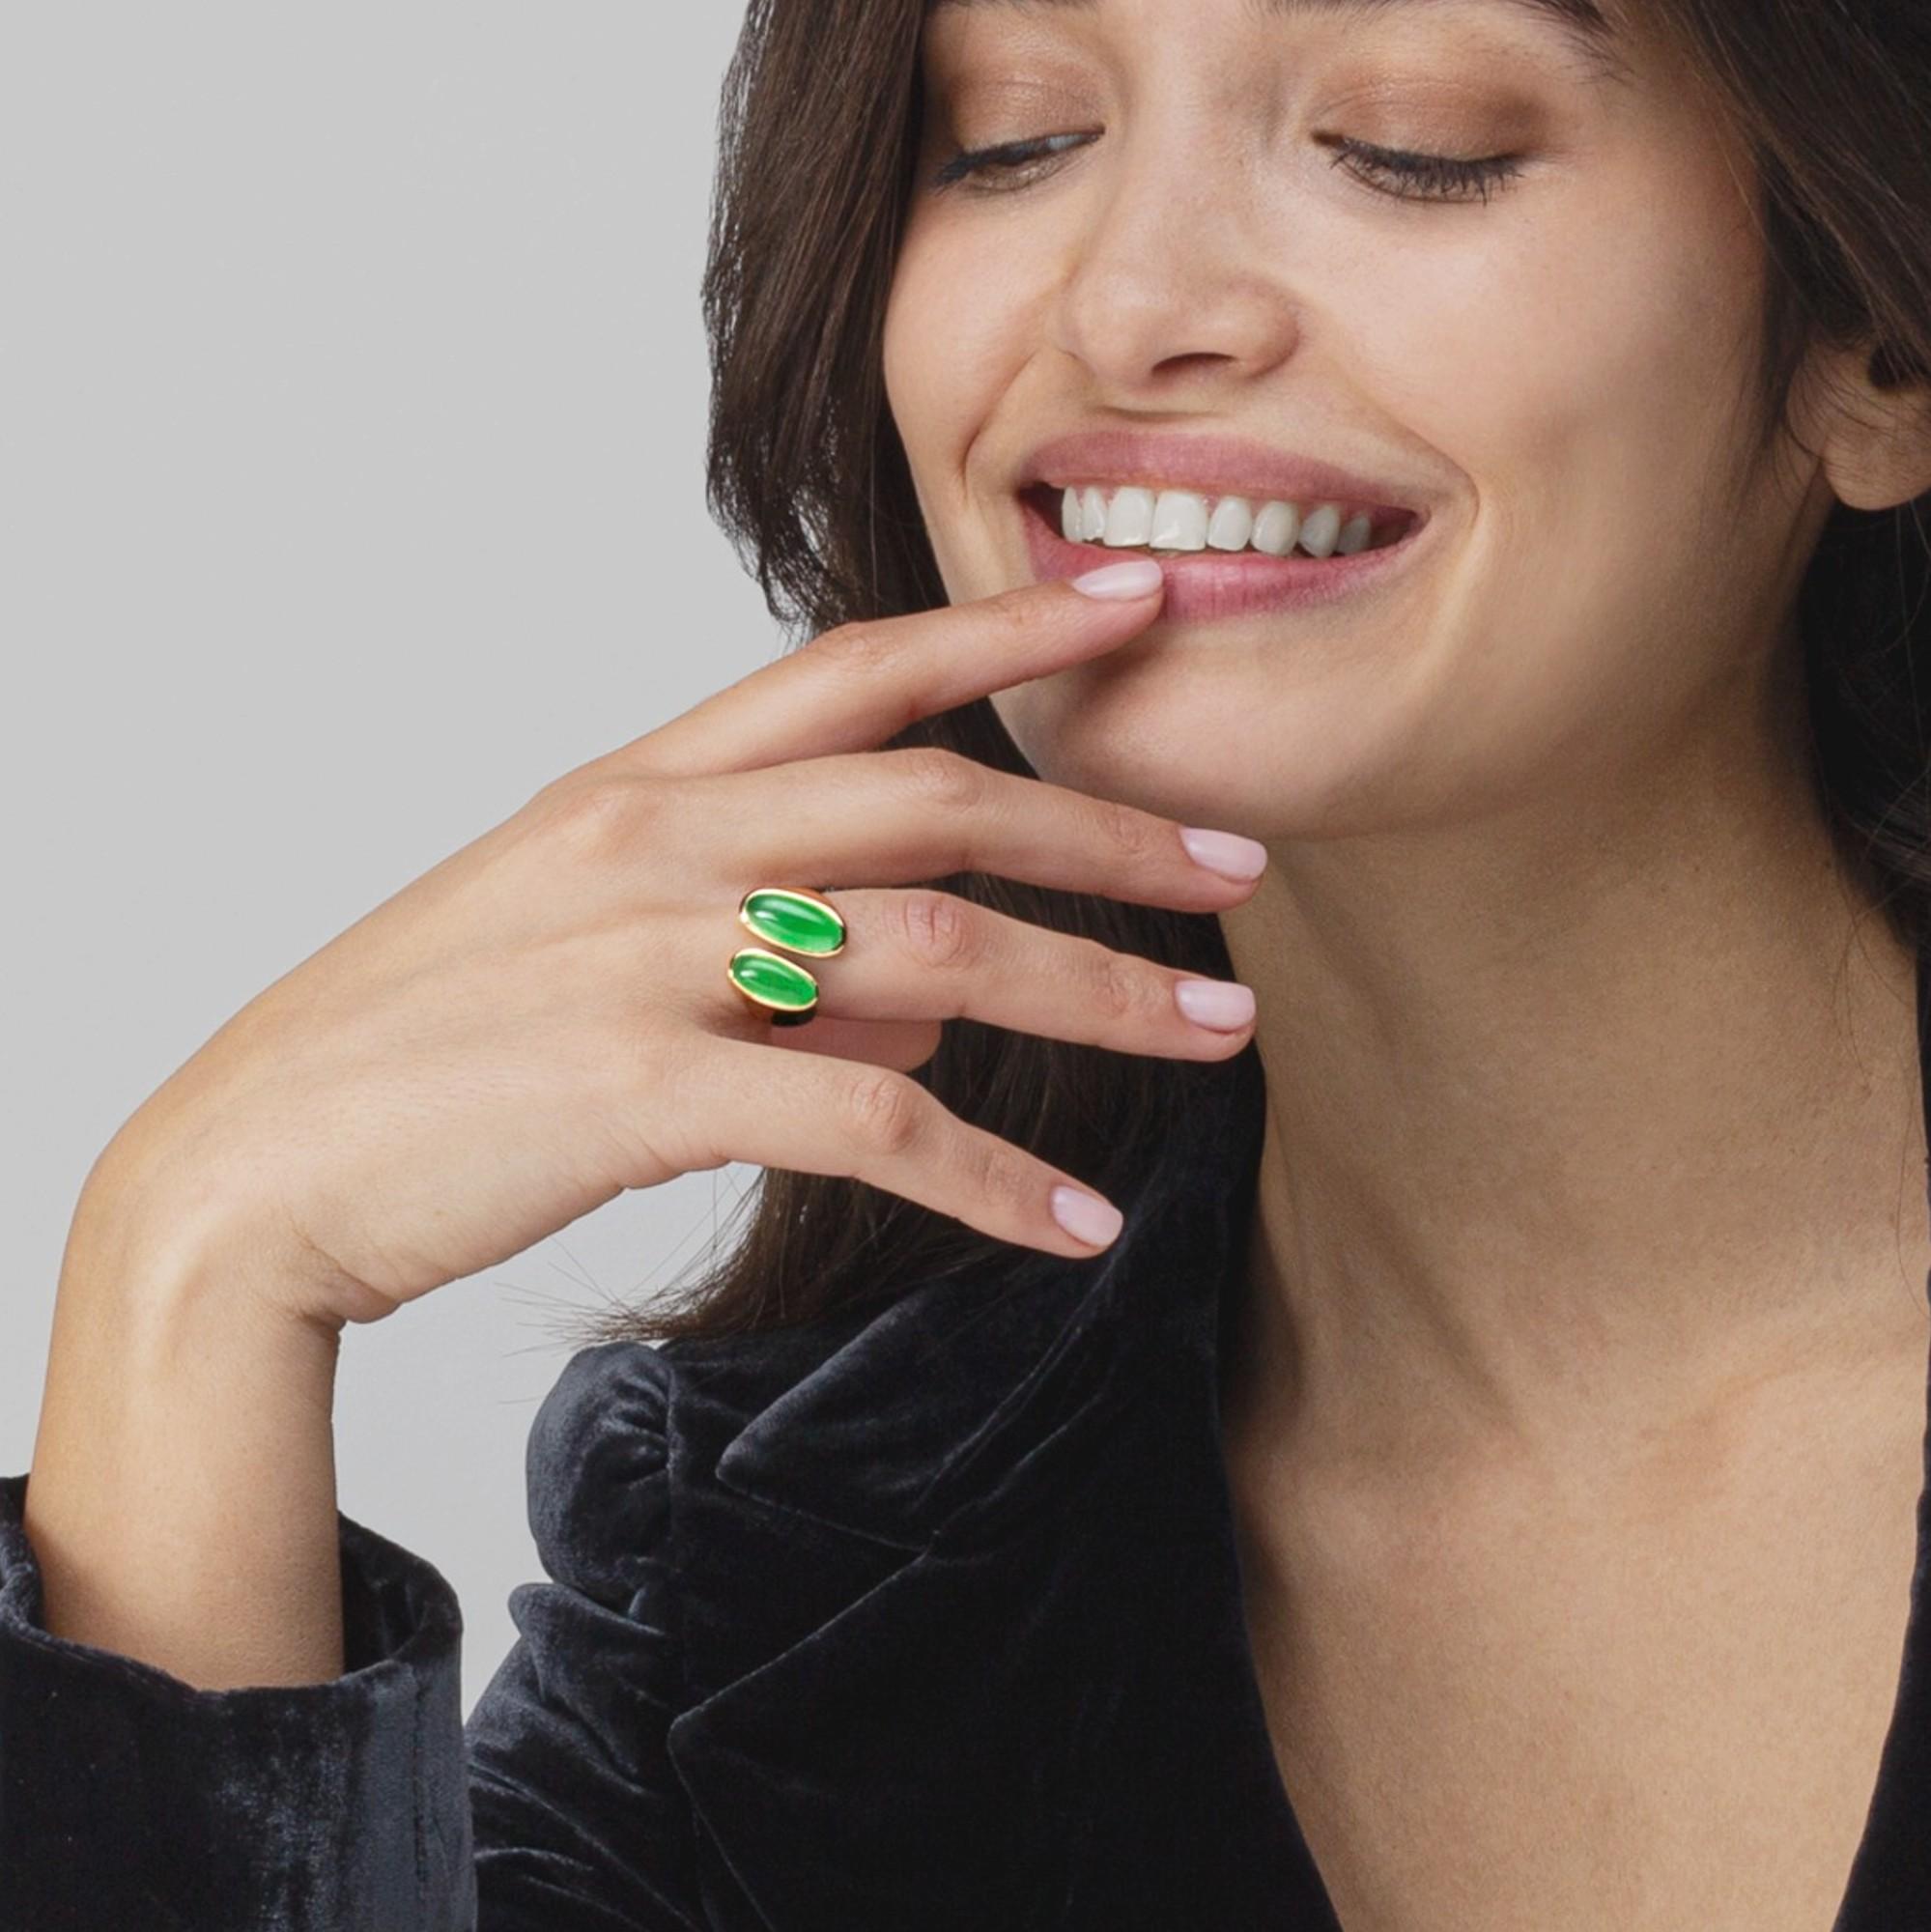 Alex Jona design collection, hand crafted in Italy, 18 karat yellow gold ring, set with two natural Burmese Jadeite Jade cabochons weighing 6.54 carats in total. Ring size US 6.5- EU 12, can be sized to any specification. 
Alex Jona jewels stand